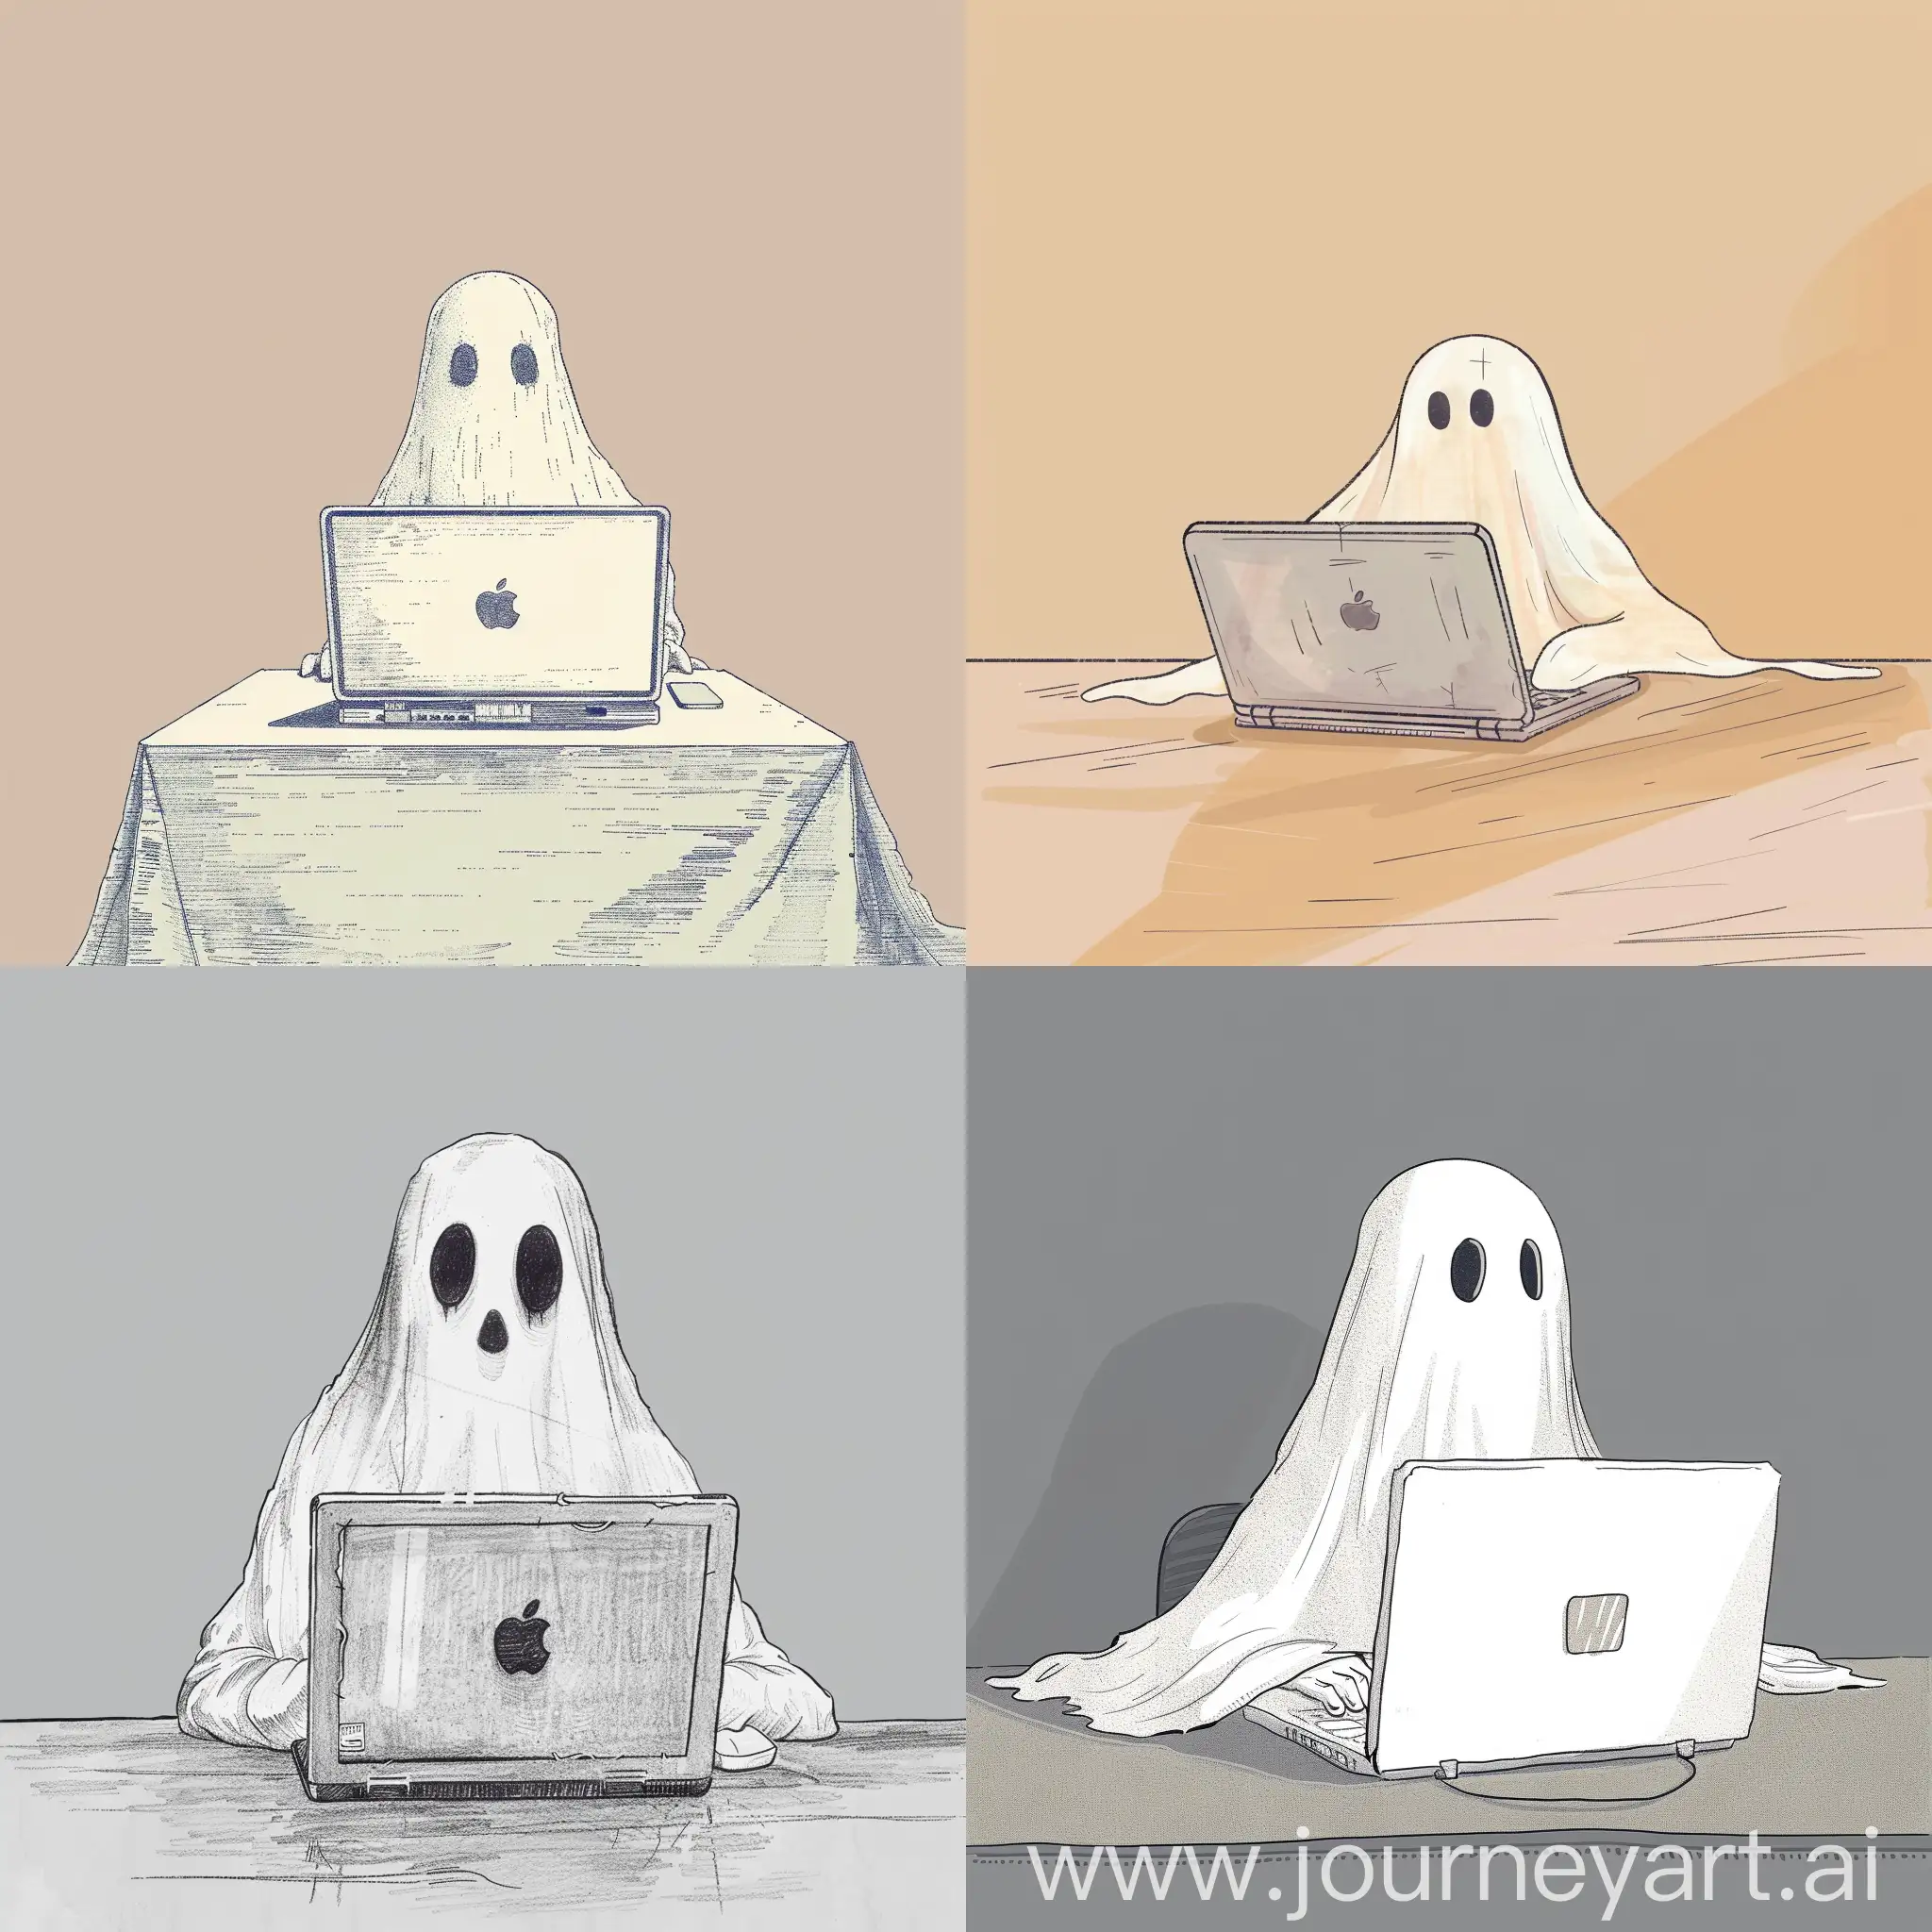 Ghostly-Figure-Working-Behind-Laptop-in-Minimalist-Style